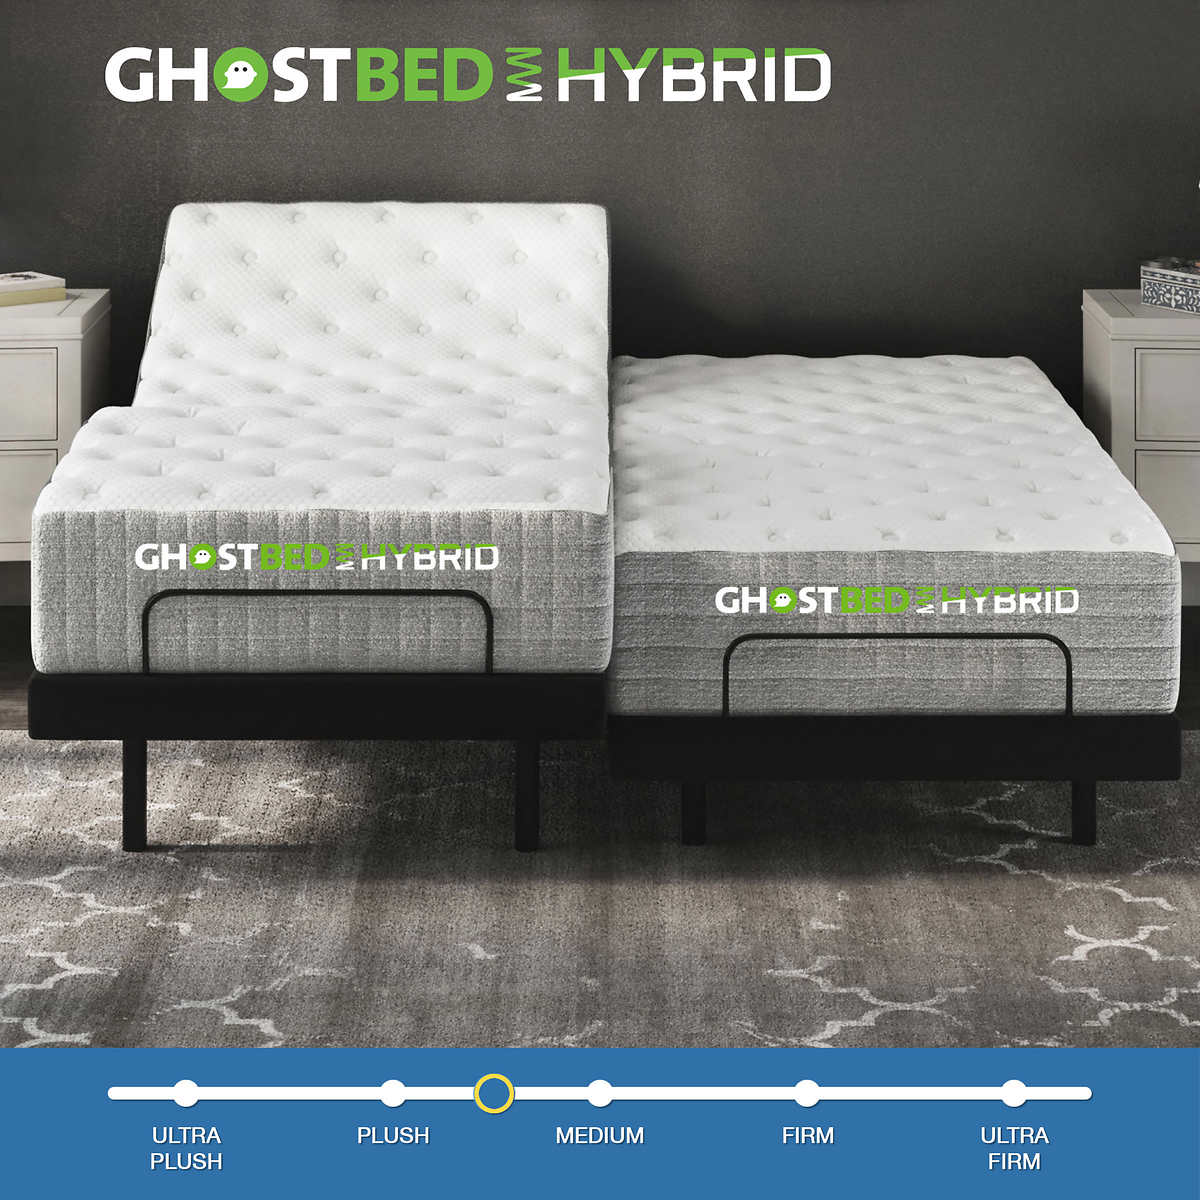 Ghostbed Hybrid 12 Mattress With, Costco Bunk Bed Mattress